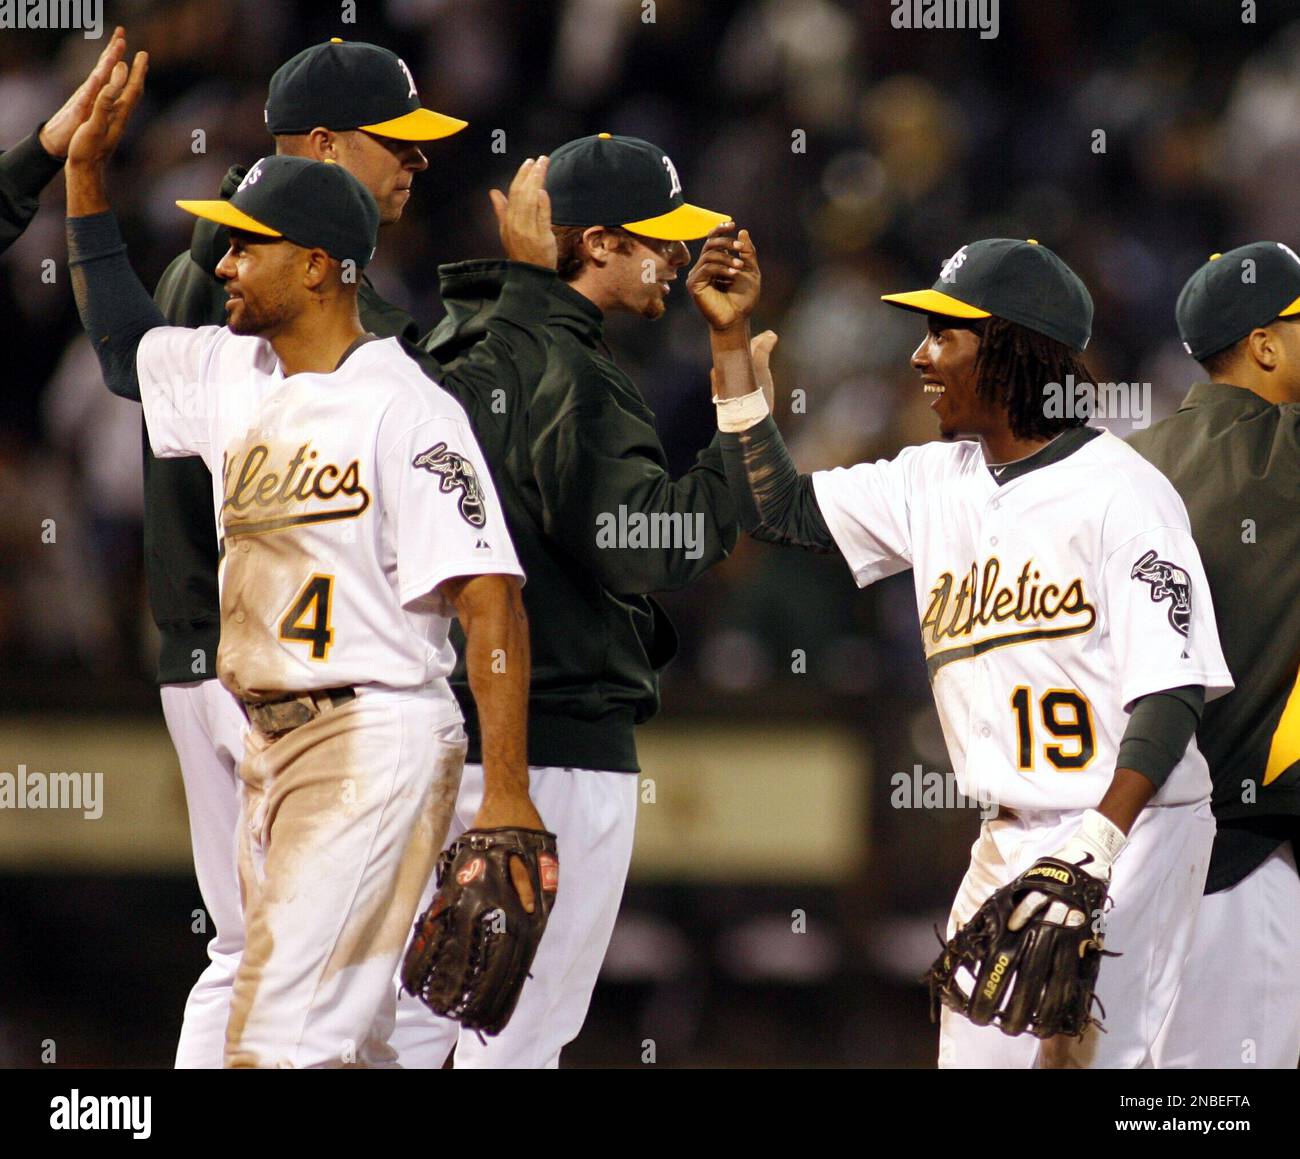 In this July 23, 2014 file photo, Oakland Athletics' Yoenis